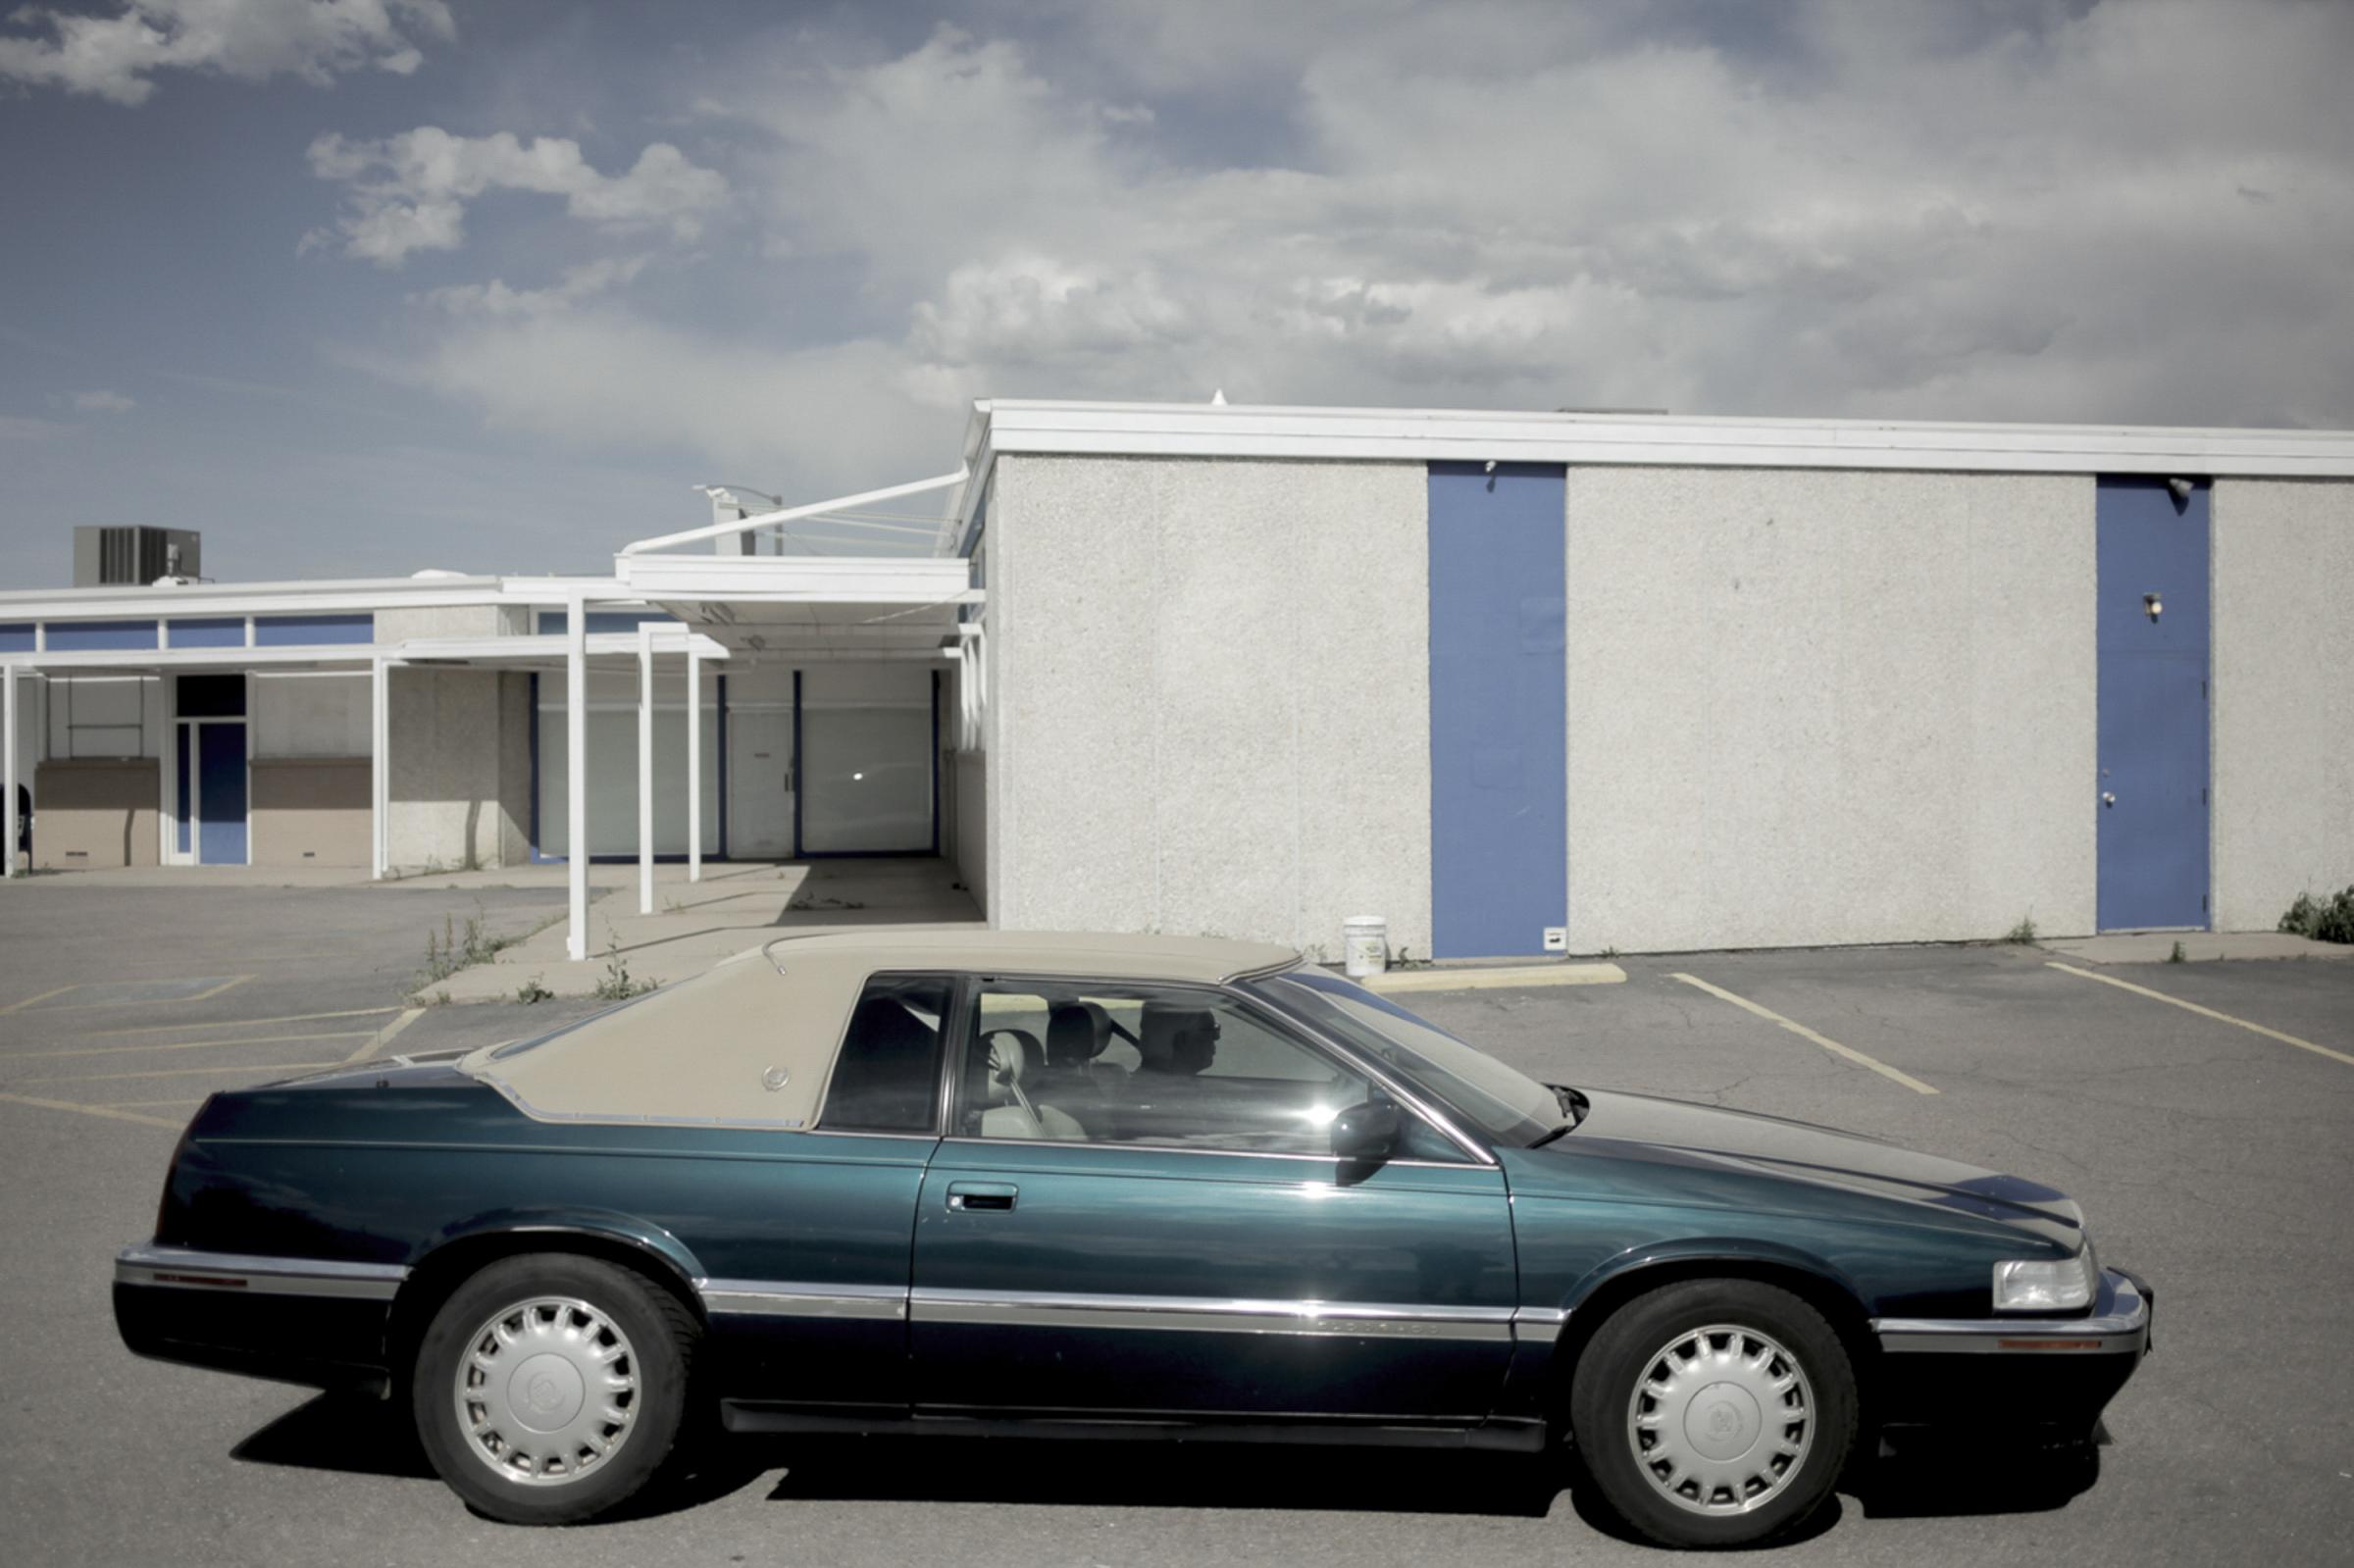 COLFAX AVE - A vacant parking lot within an abandoned strip mall in...